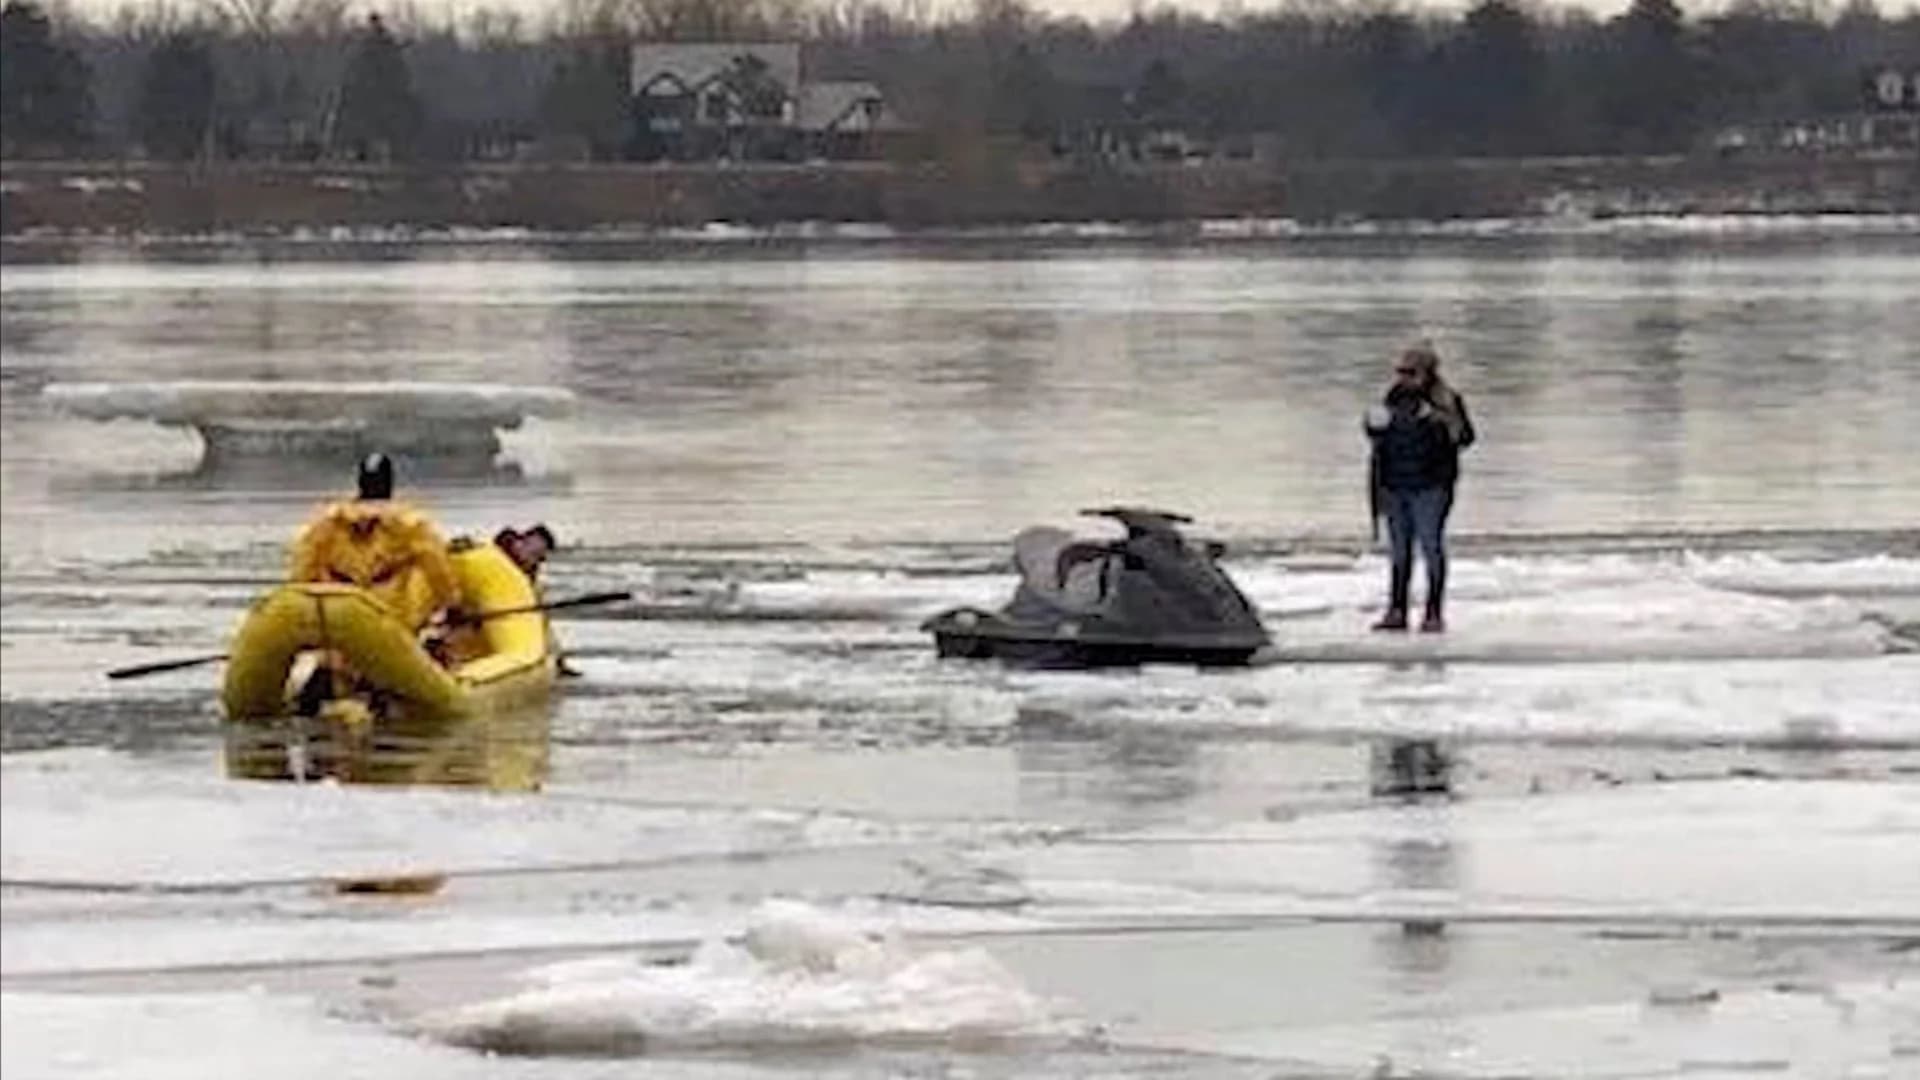 Authorities: Woman tries to enter US illegally on watercraft, gets stranded on ice